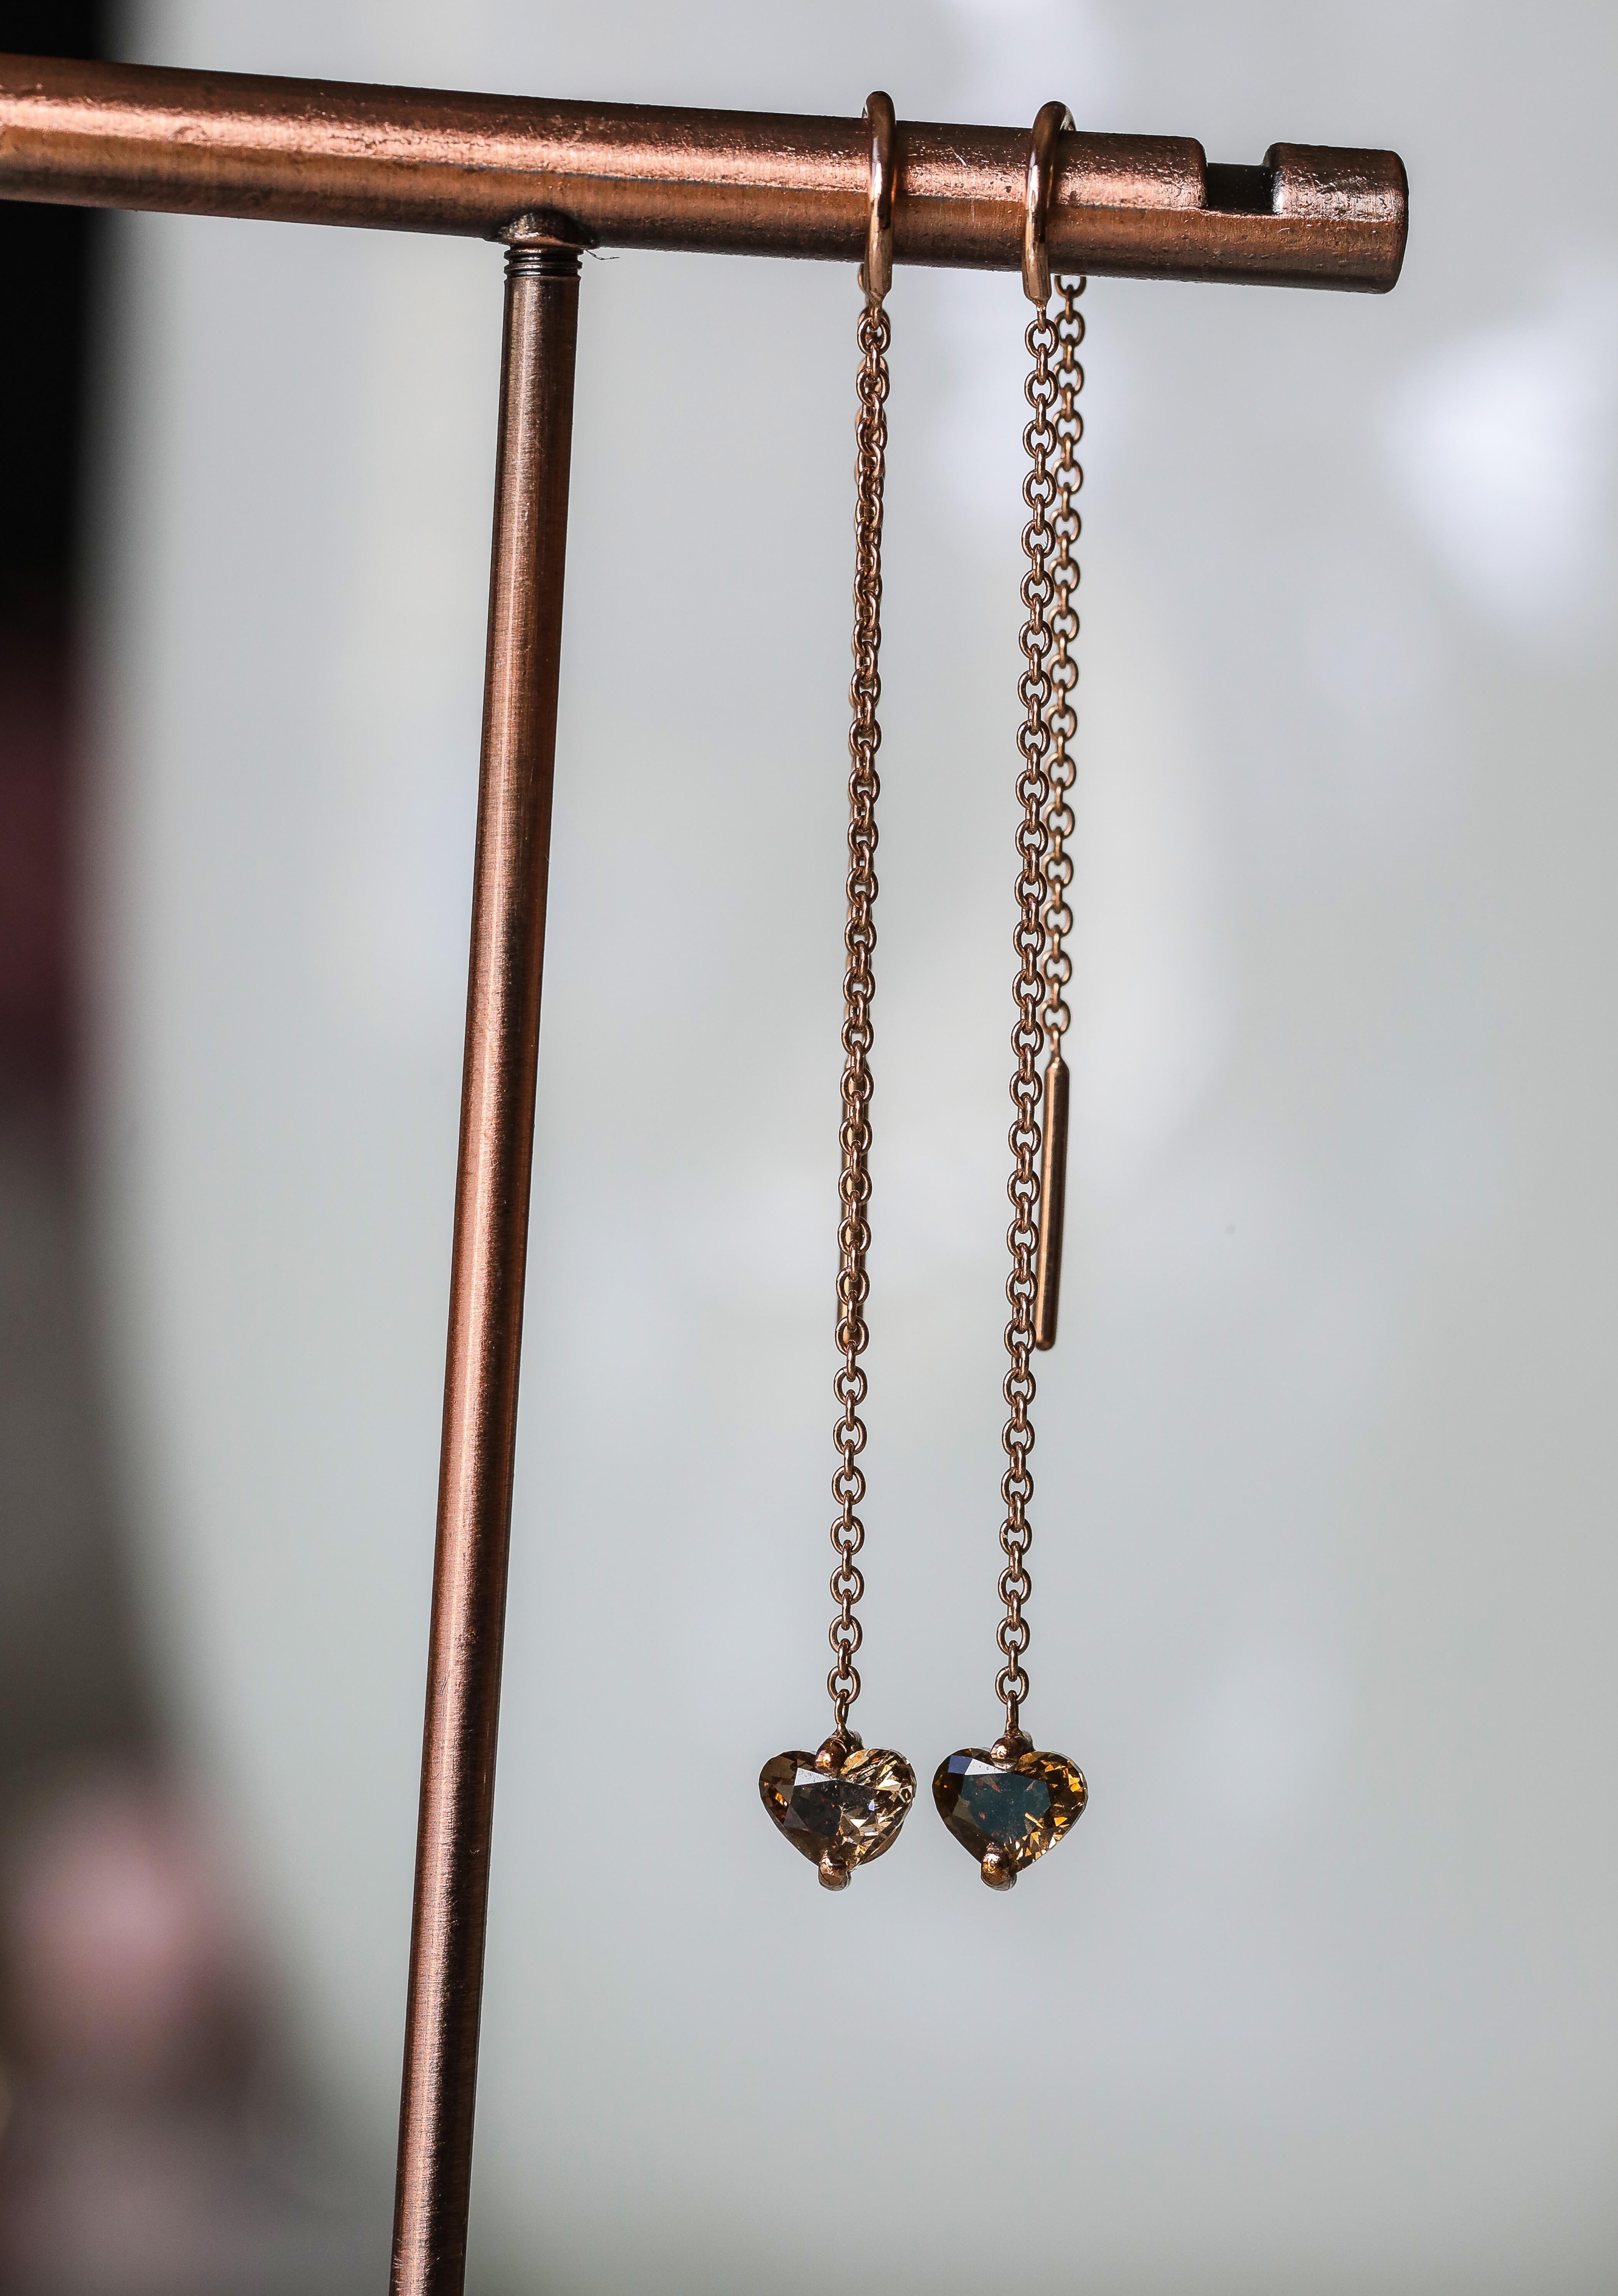 Hand made in 9 karat Rose gold delicately hanging from a chain are .25 cts of Champagne coloured Diamond hearts on each earring. These light weight floating diamond hearts are easily worn on any occasion. Champagne diamonds have risen in popularity